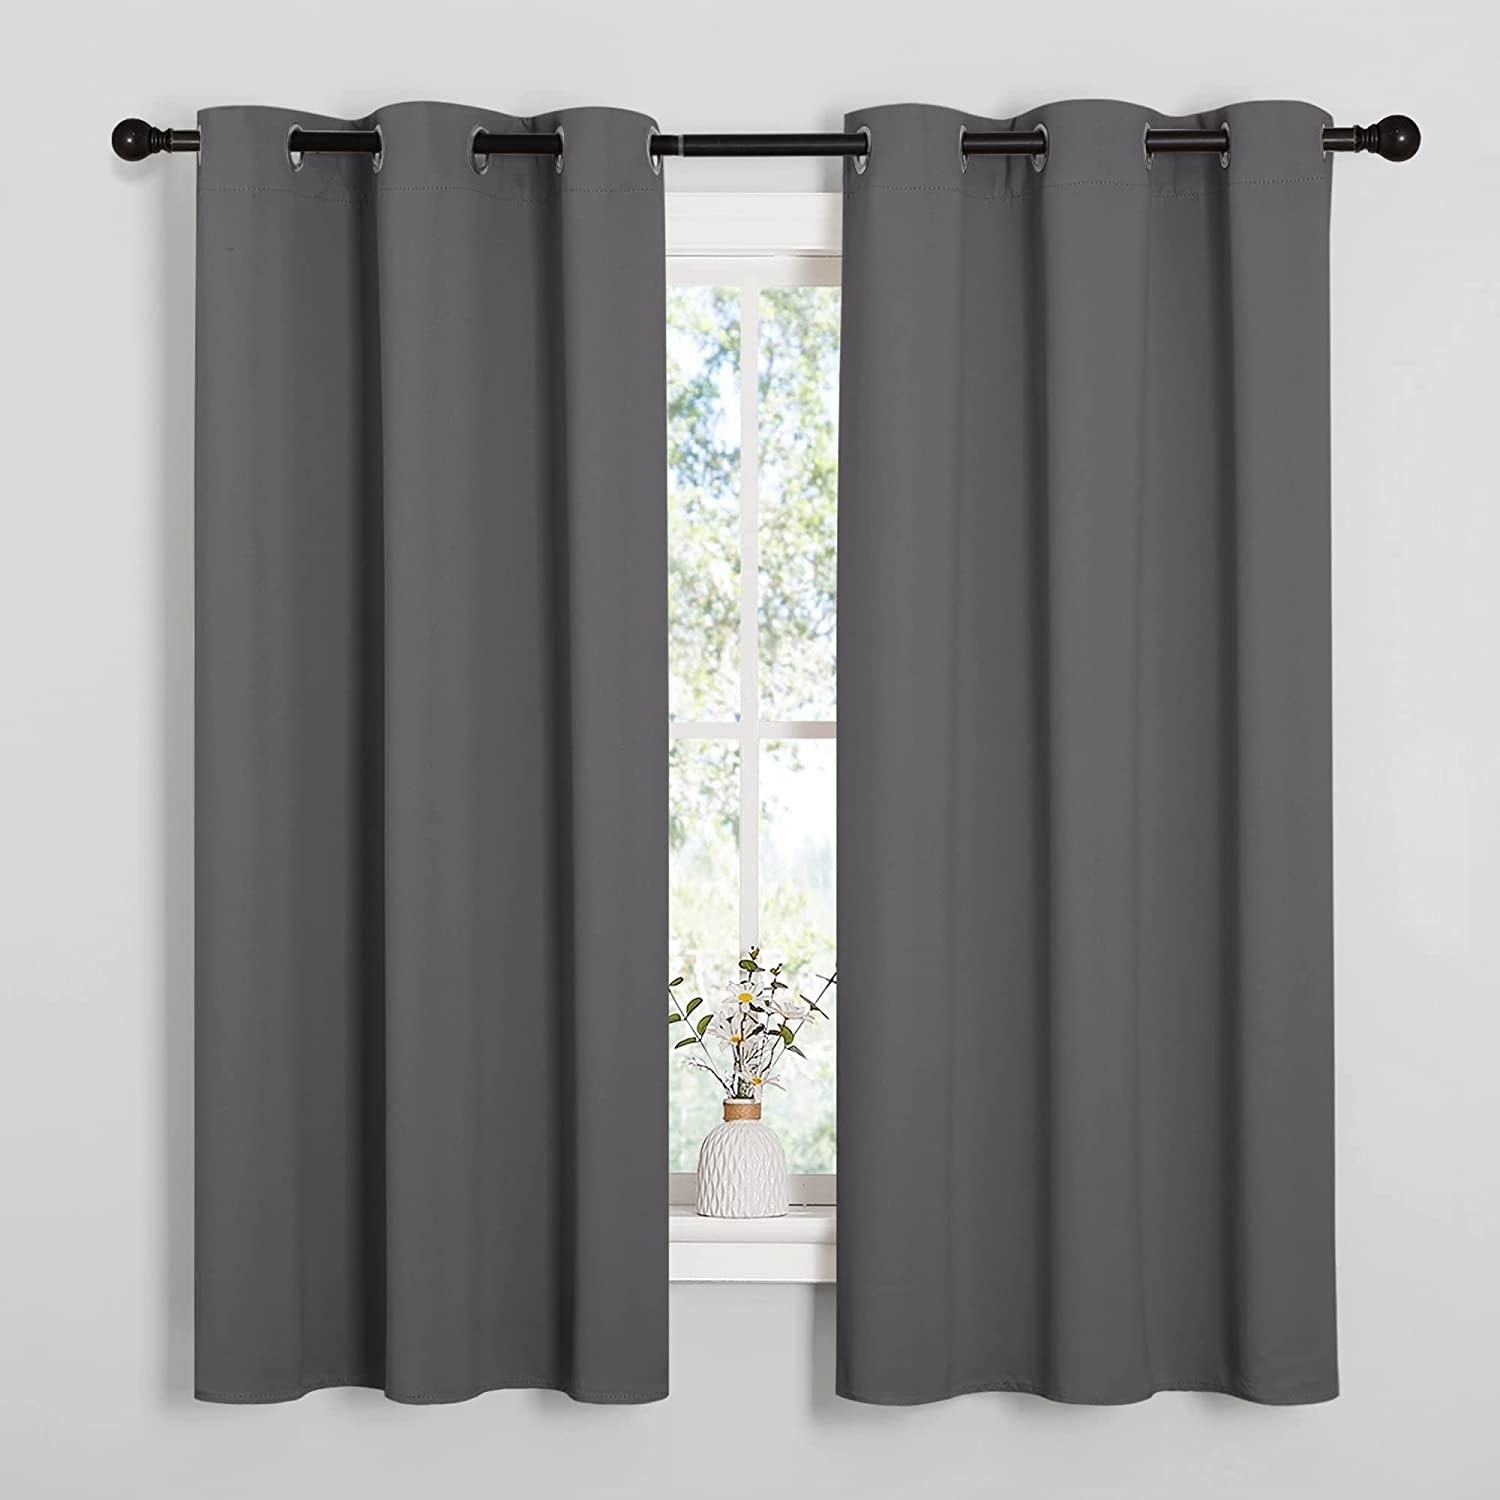 a pair of curtain panels on a window